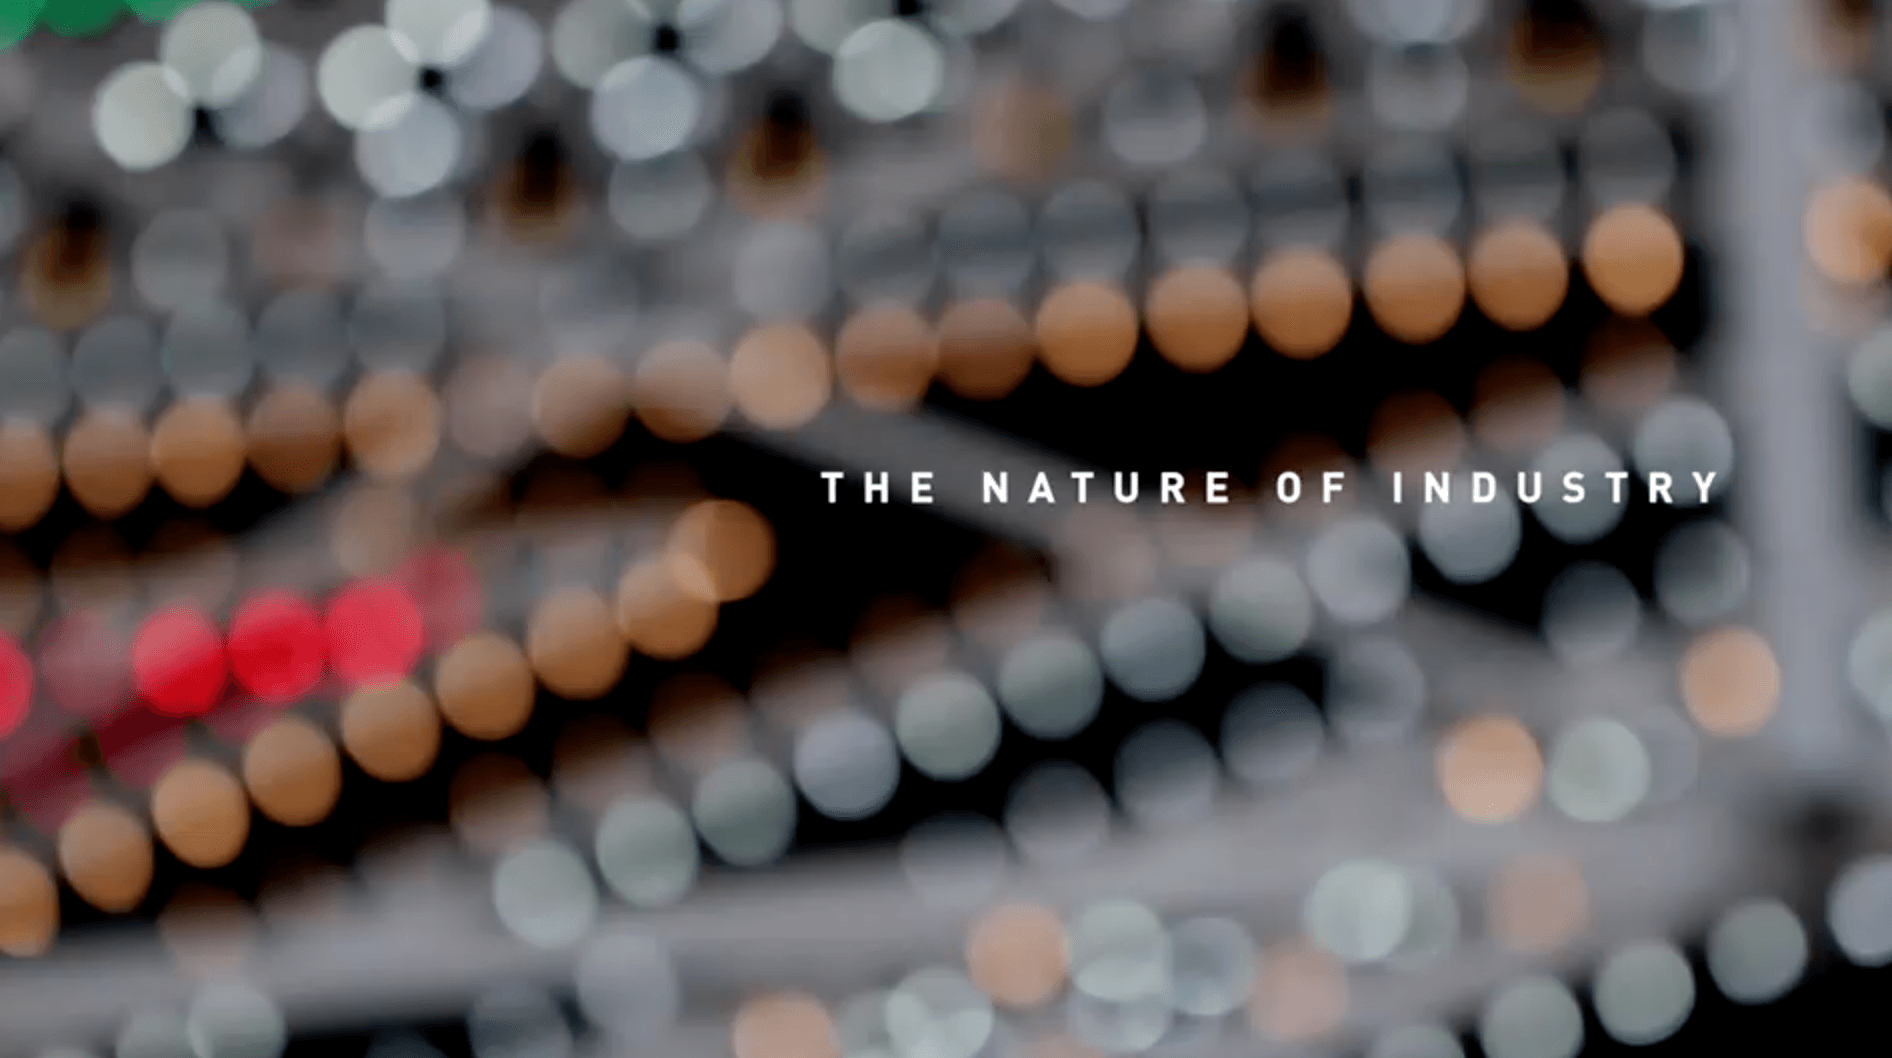 The Nature of Industry